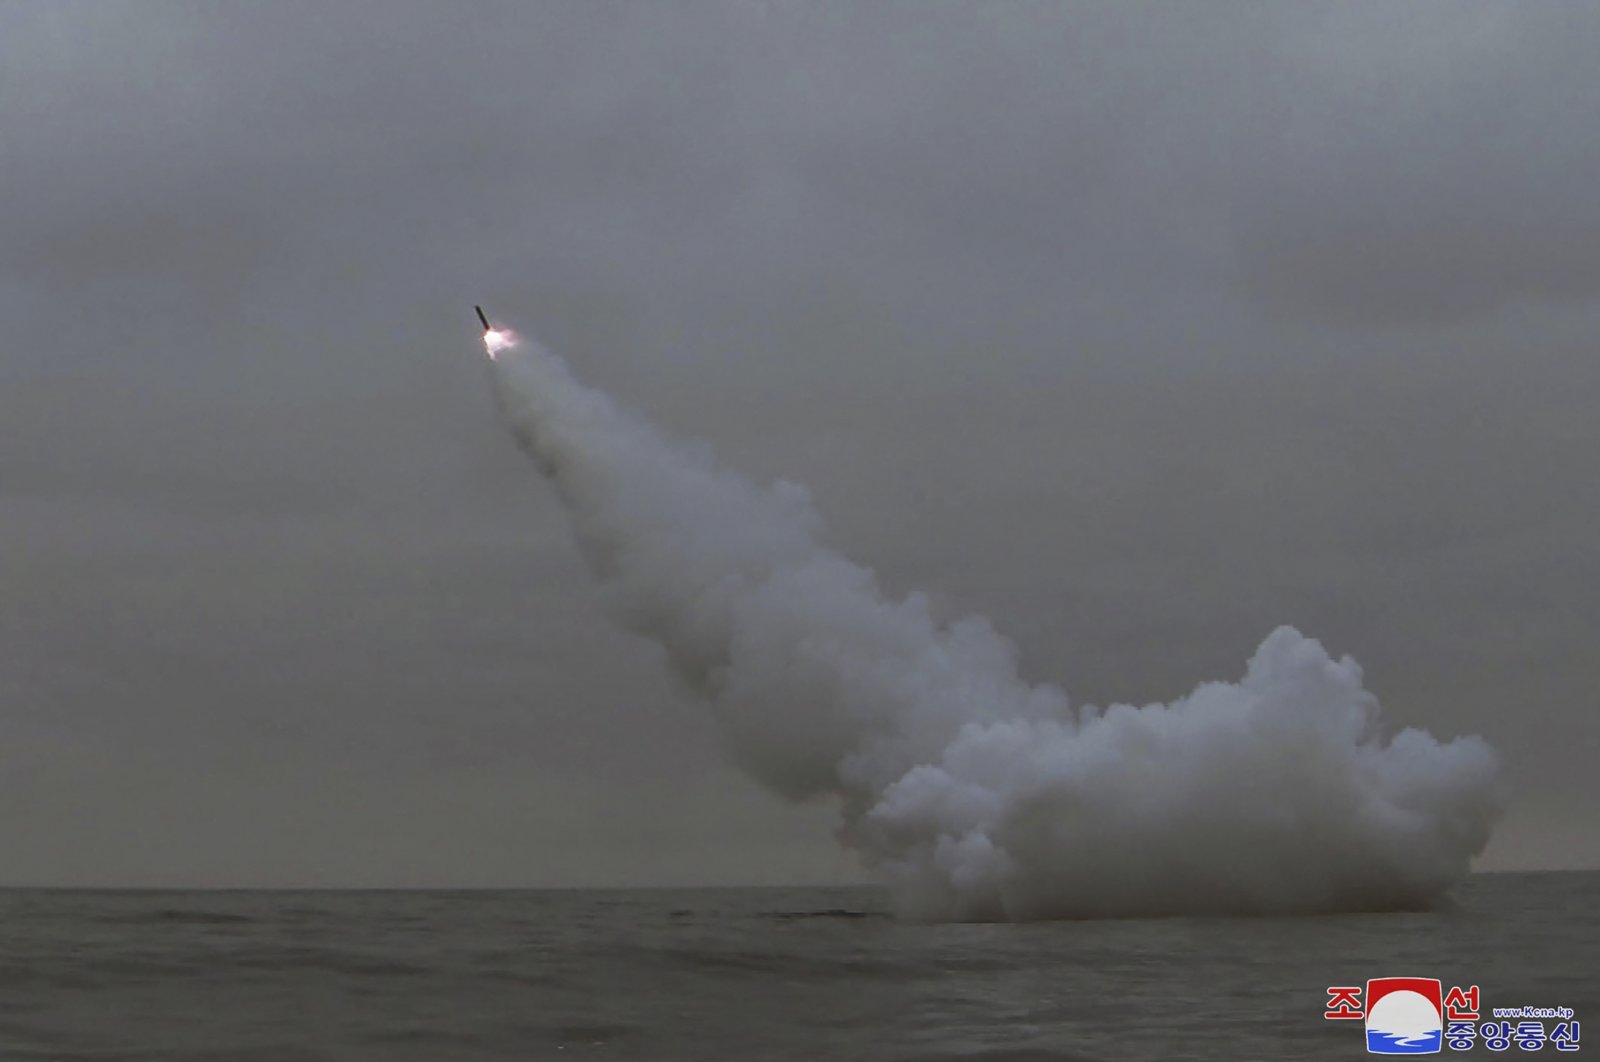 A strategic cruise missile being fired from a submarine in the waters of Gyeongpo Bay, North Korea, March 13, 2023. (AFP Photo)